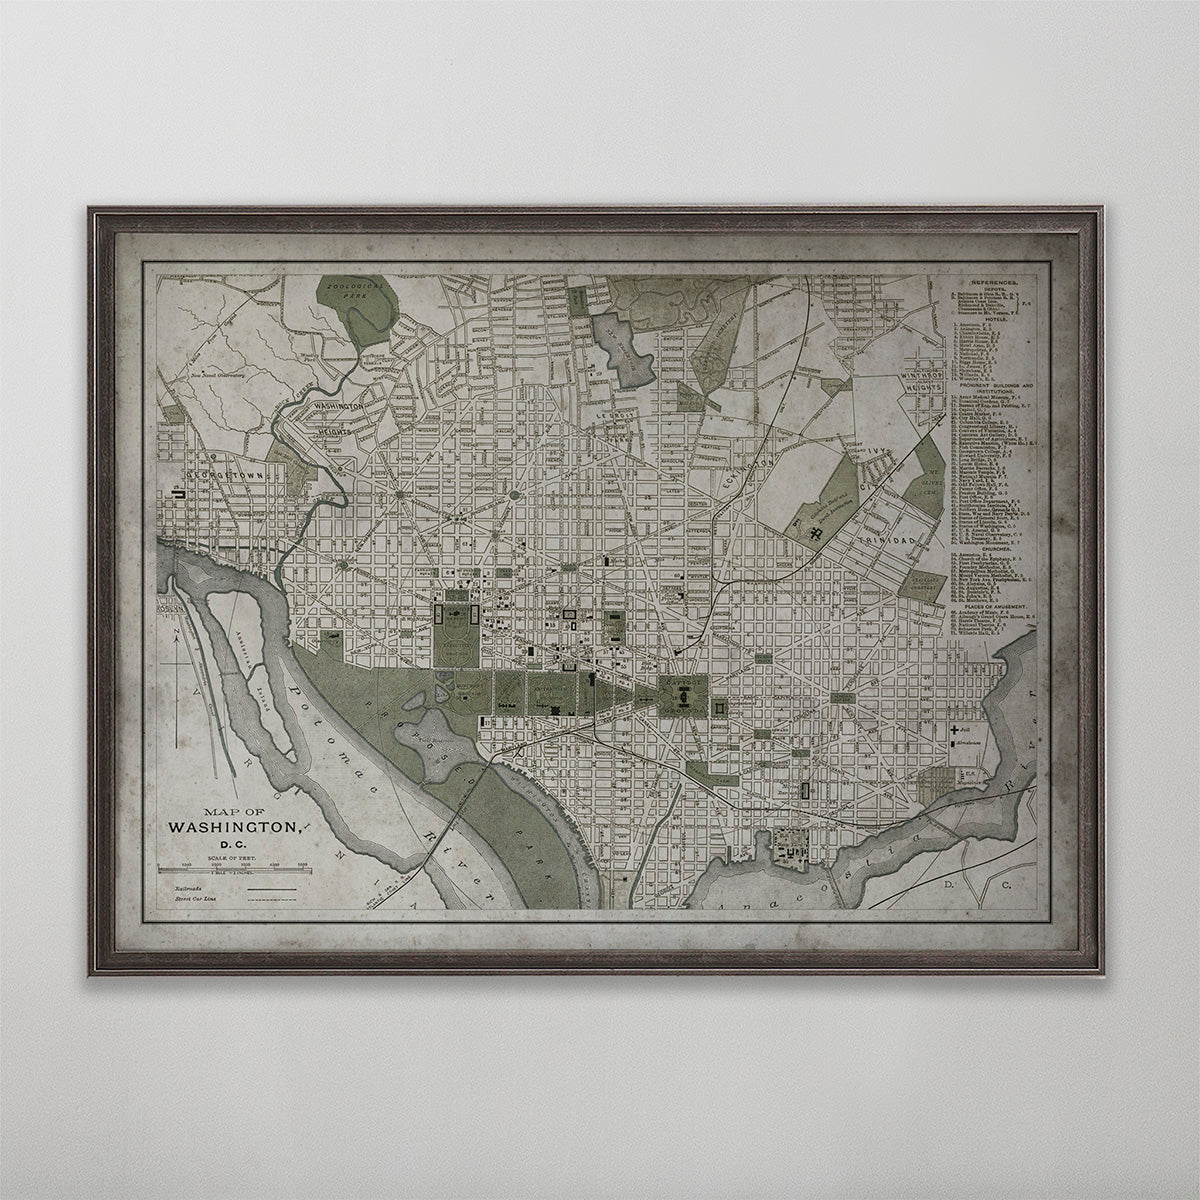 Old vintage historic map of Washington D.C. for wall art home decor. 